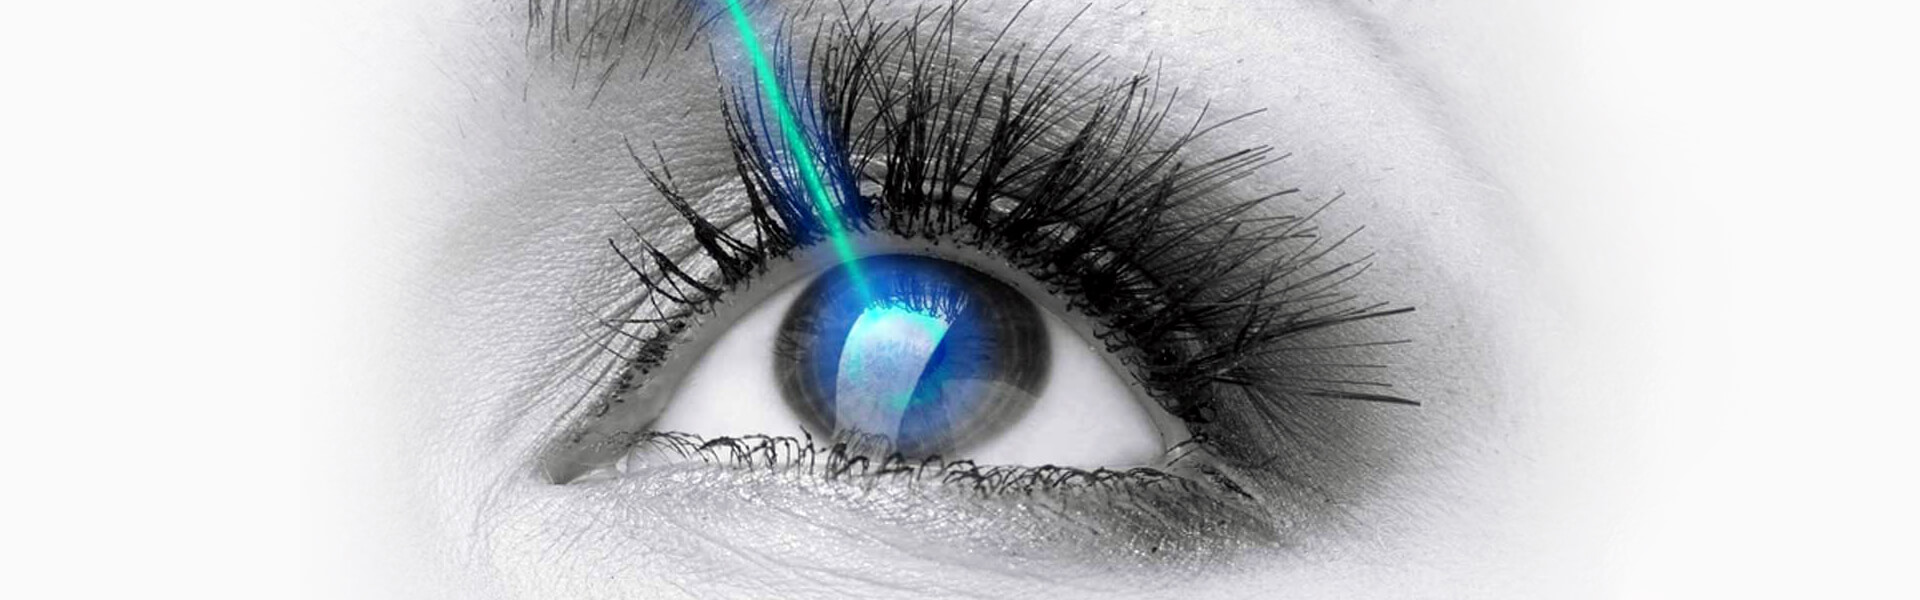 5 Thing You Need to Know About Laser Eye Surgery